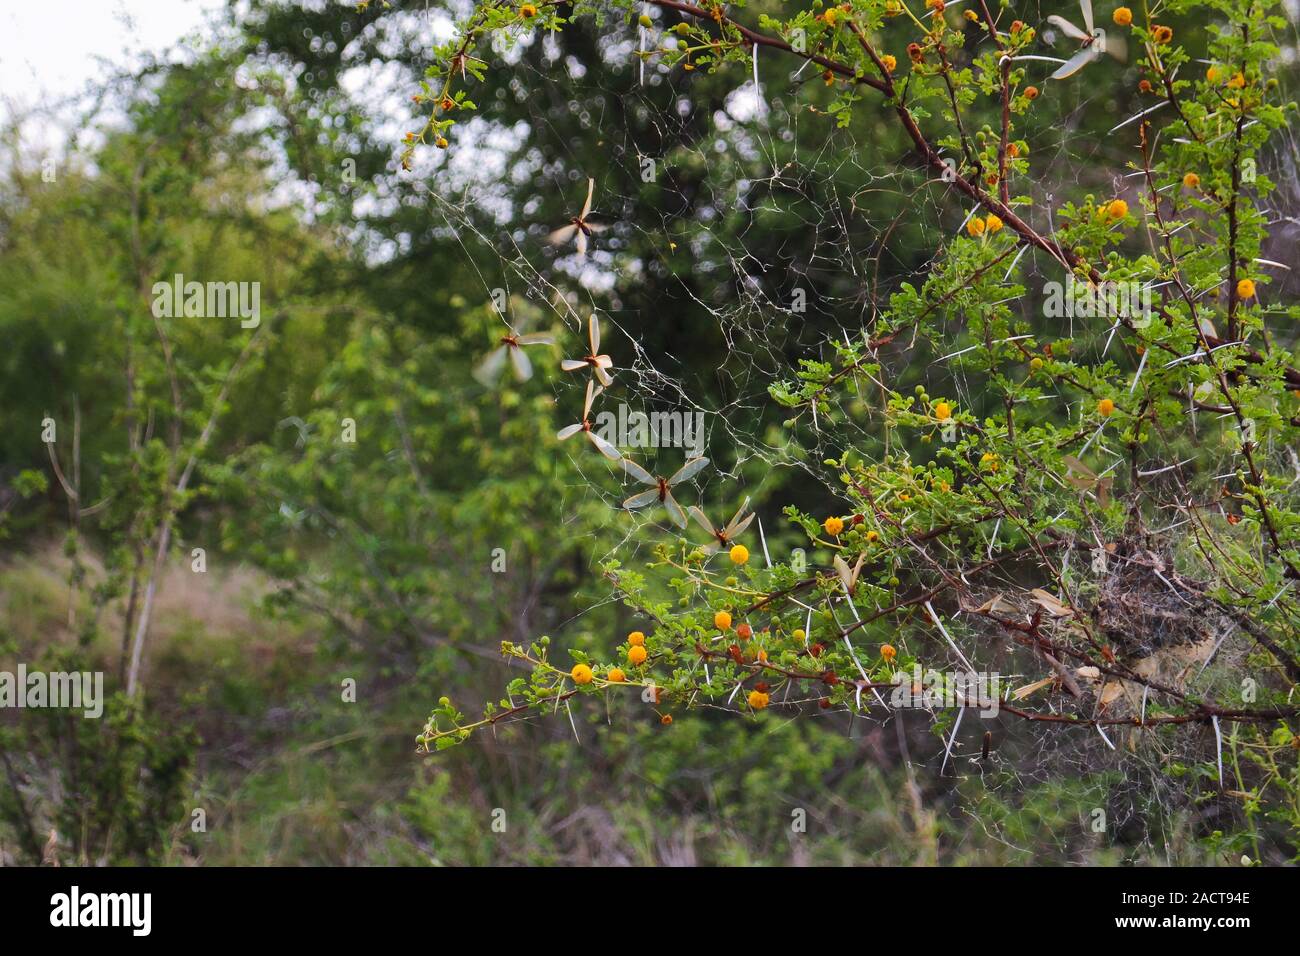 Winged flying termites flutter around a spider's web and the thorns of a south african acacia shrub (Vachellia karroo). Seen in Krüger National Park, South Africa. Stock Photo